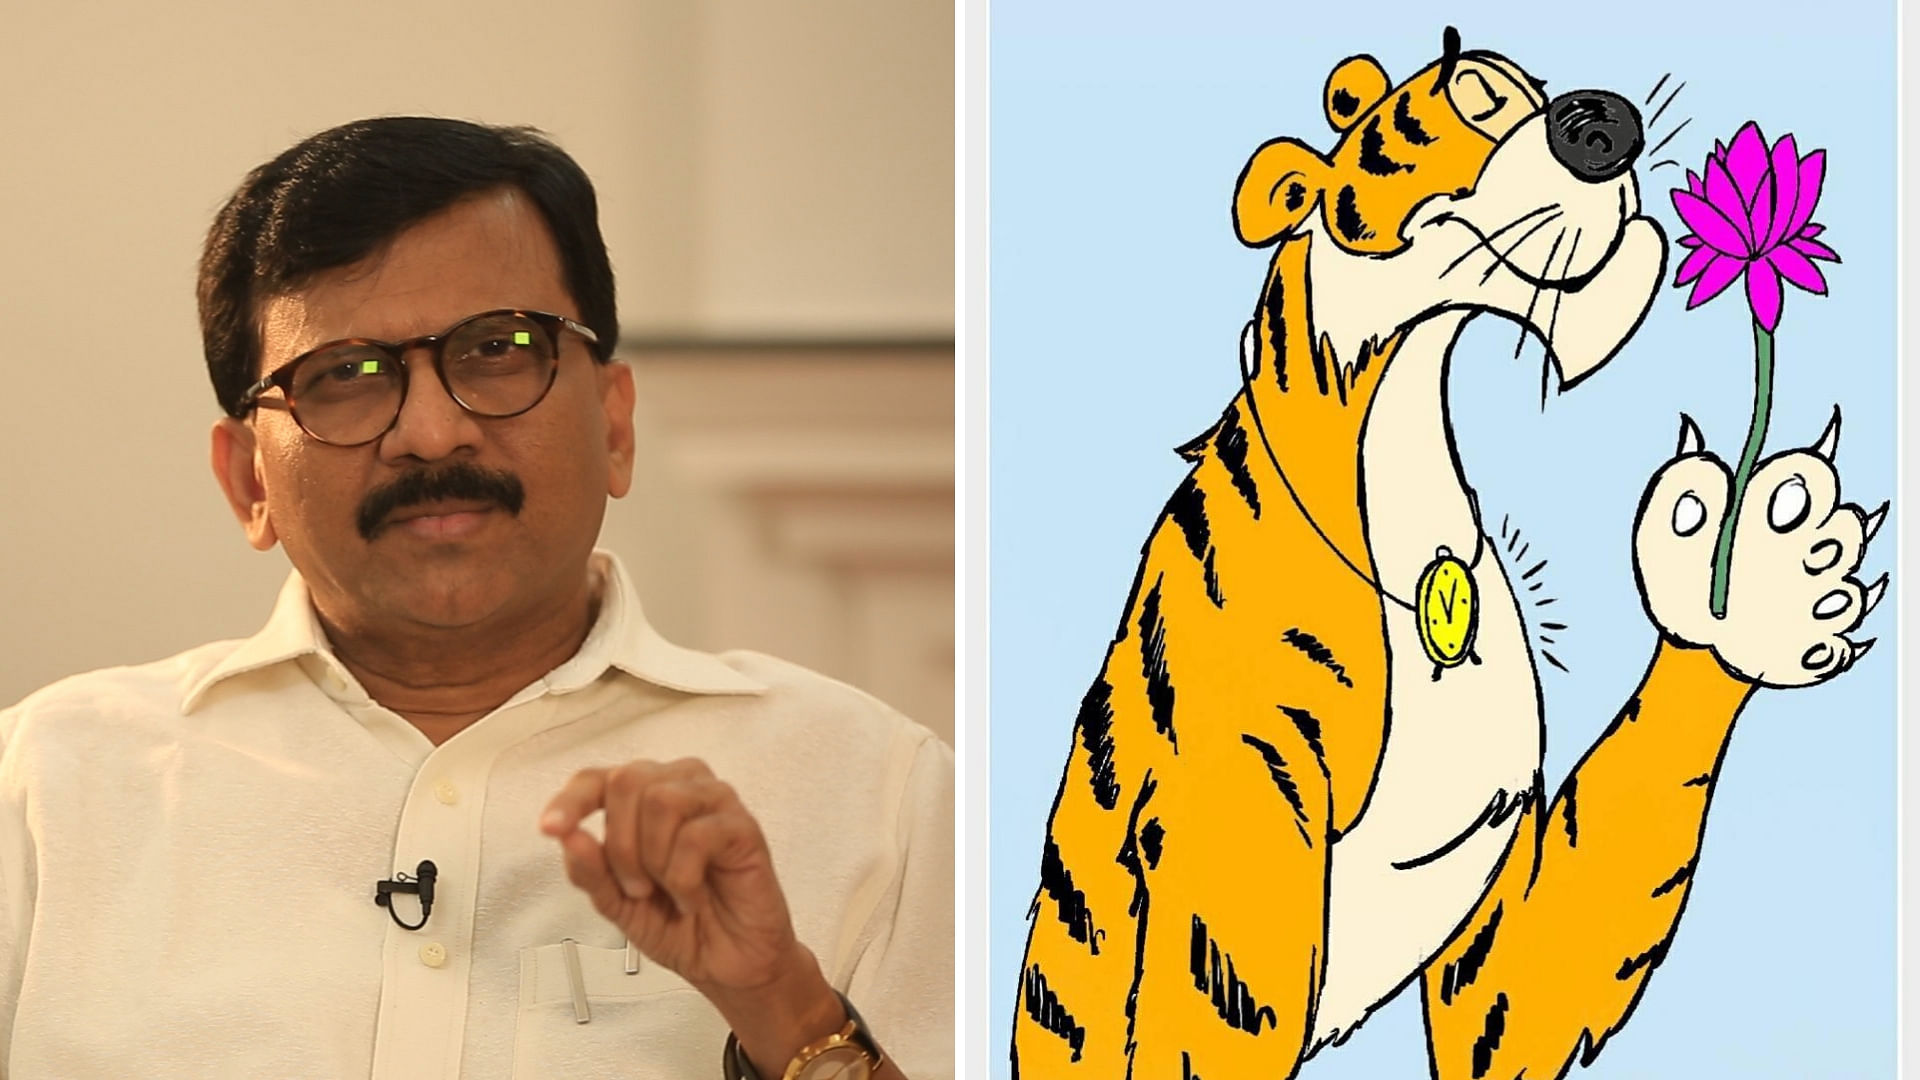 On Twitter, Shiv Sena leader Sanjay Raut posted a cartoon showing a tiger (Shiv Sena’s party symbol) wearing a clock locket (NCP’s party symbol) while sniffing a lotus (BJP’s party symbol.)&nbsp;